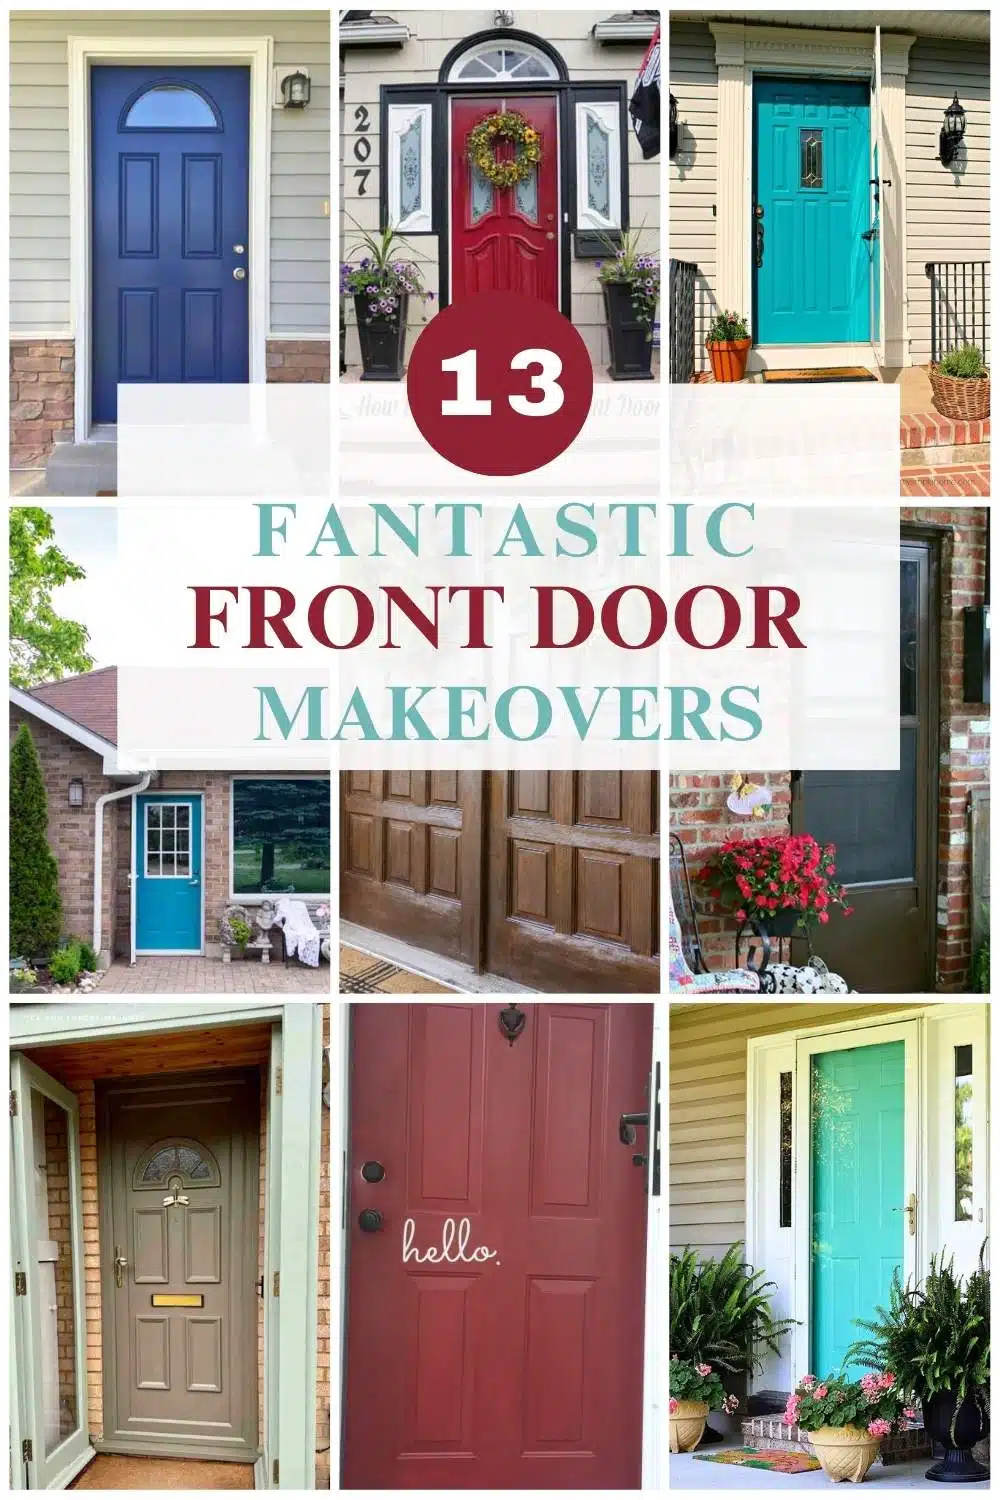 collage of 9 front door makeovers with text overlay.